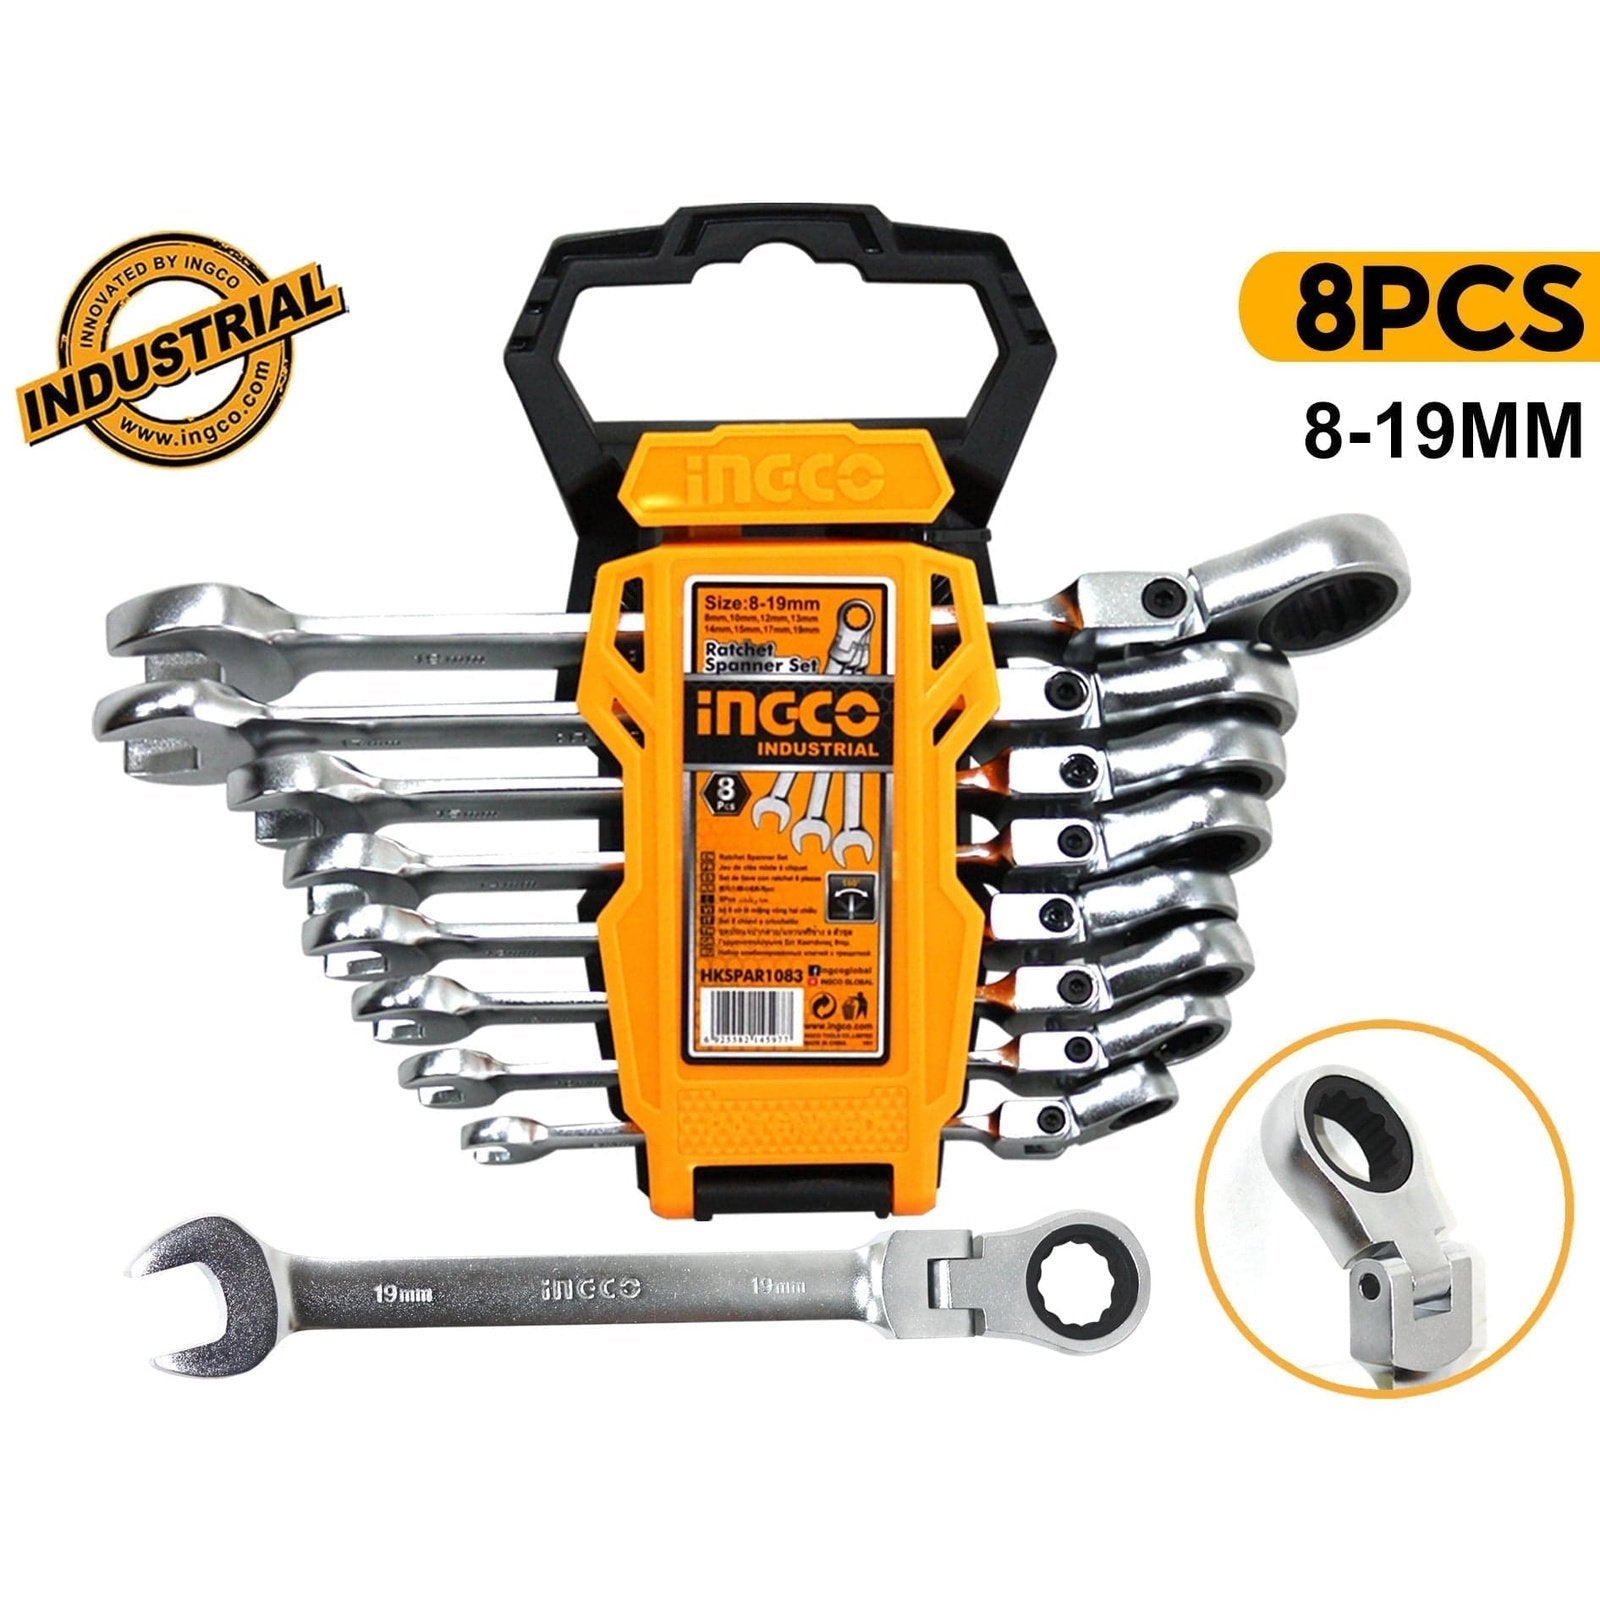 Ingco 8 Pieces Flexible Ratchet Spanner Set 8-19mm - HKSPAR1083 | Supply Master | Accra, Ghana Wrenches Buy Tools hardware Building materials